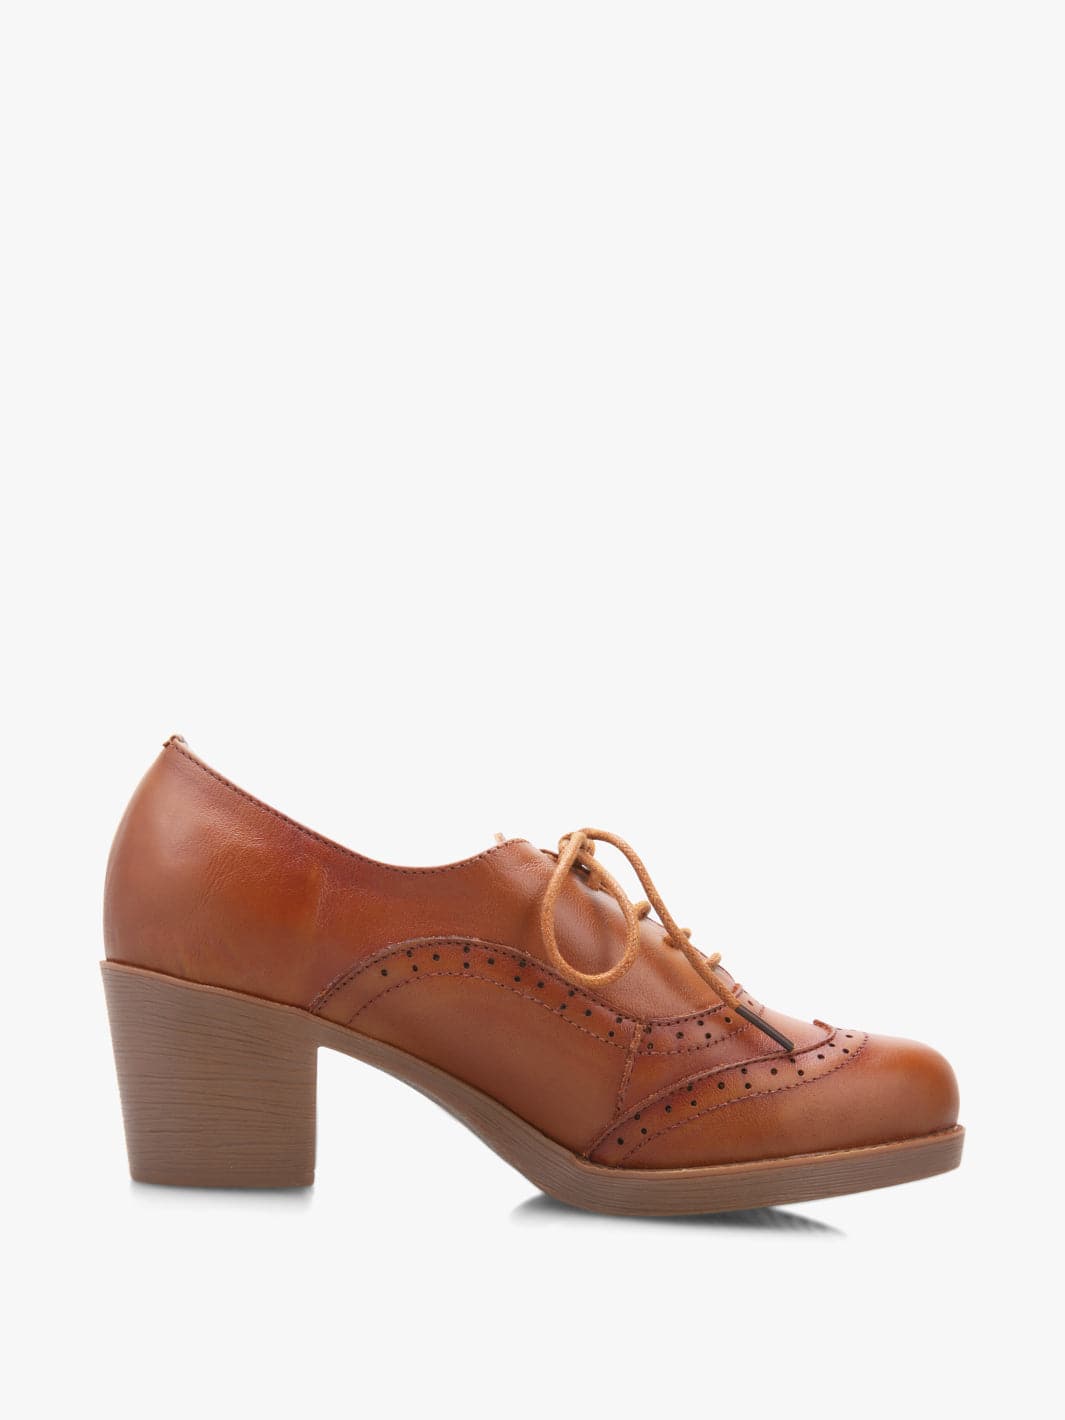 Beautiful Flora Classic Shoes - Ethically Made Vegan Leather Shoes– Ecosusi